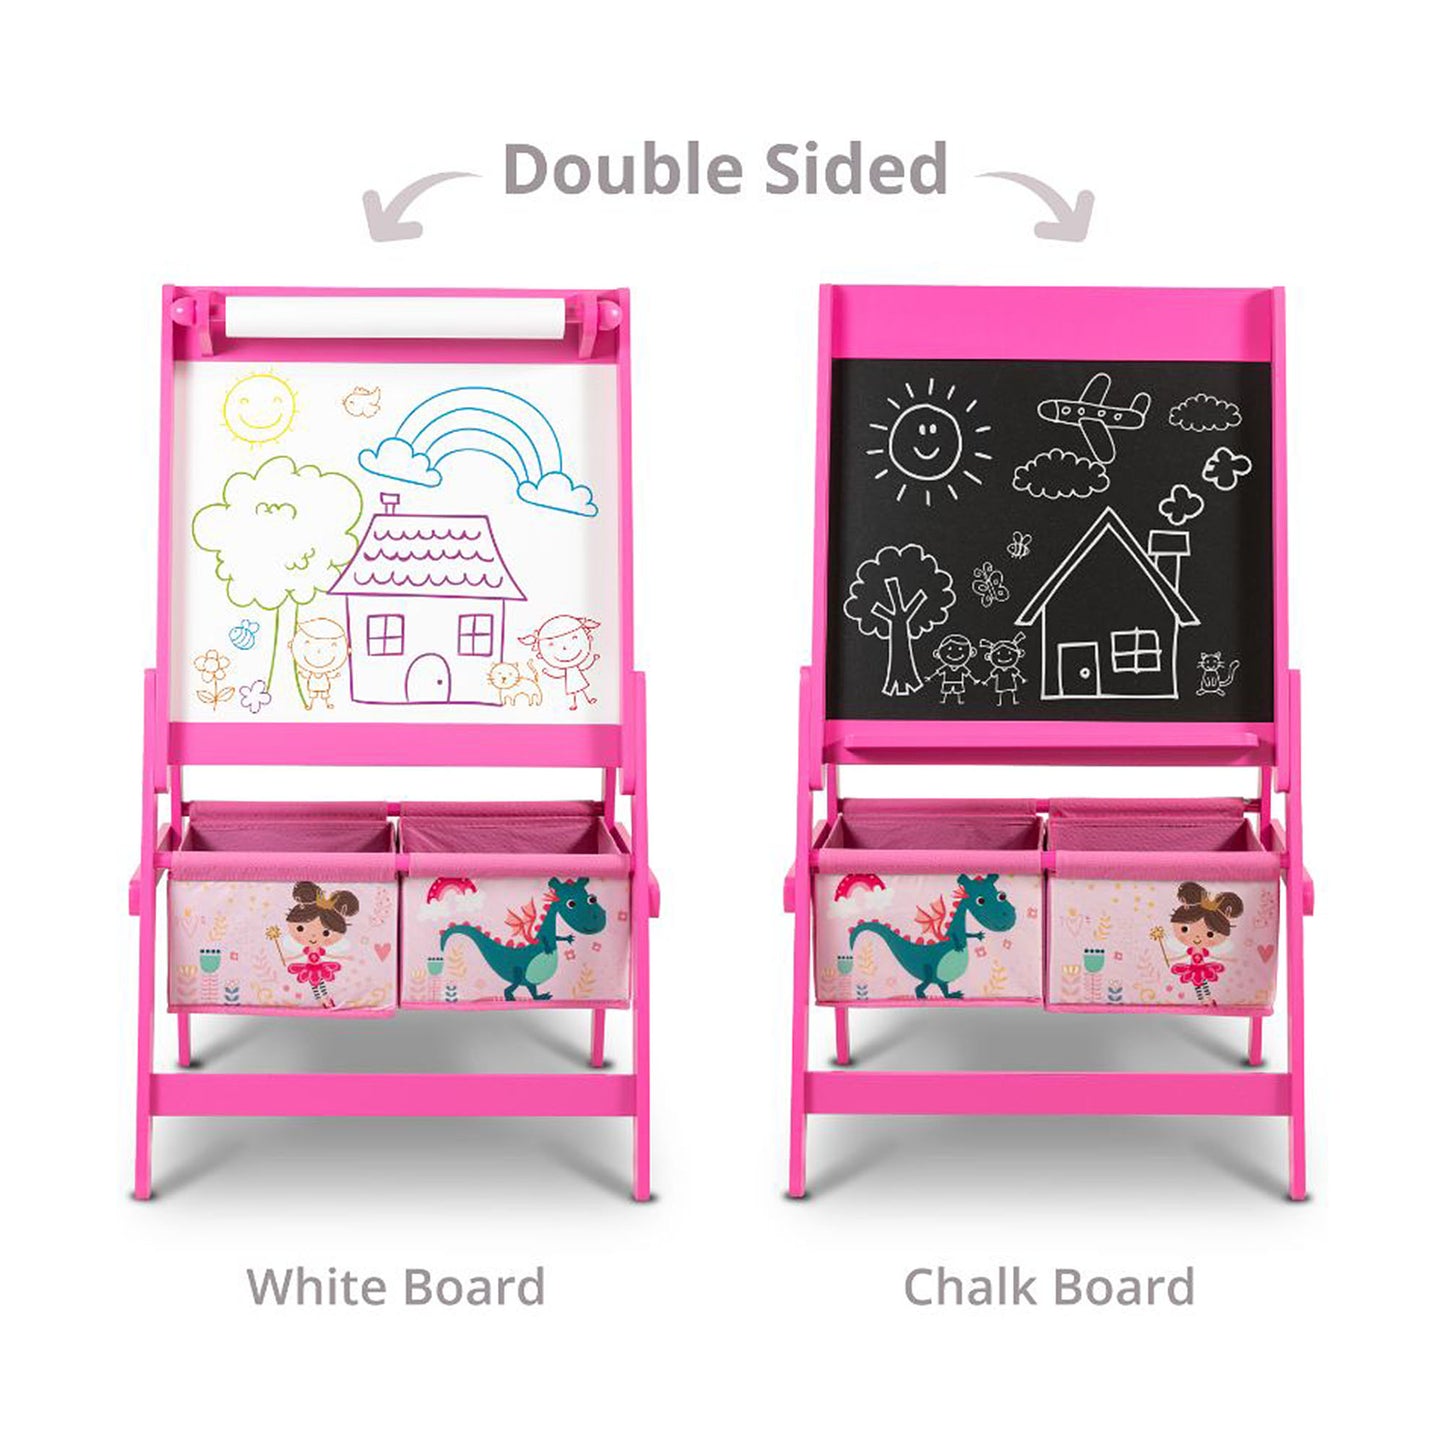 Children's wooden board for writing and drawing, double-sided - DREAMS